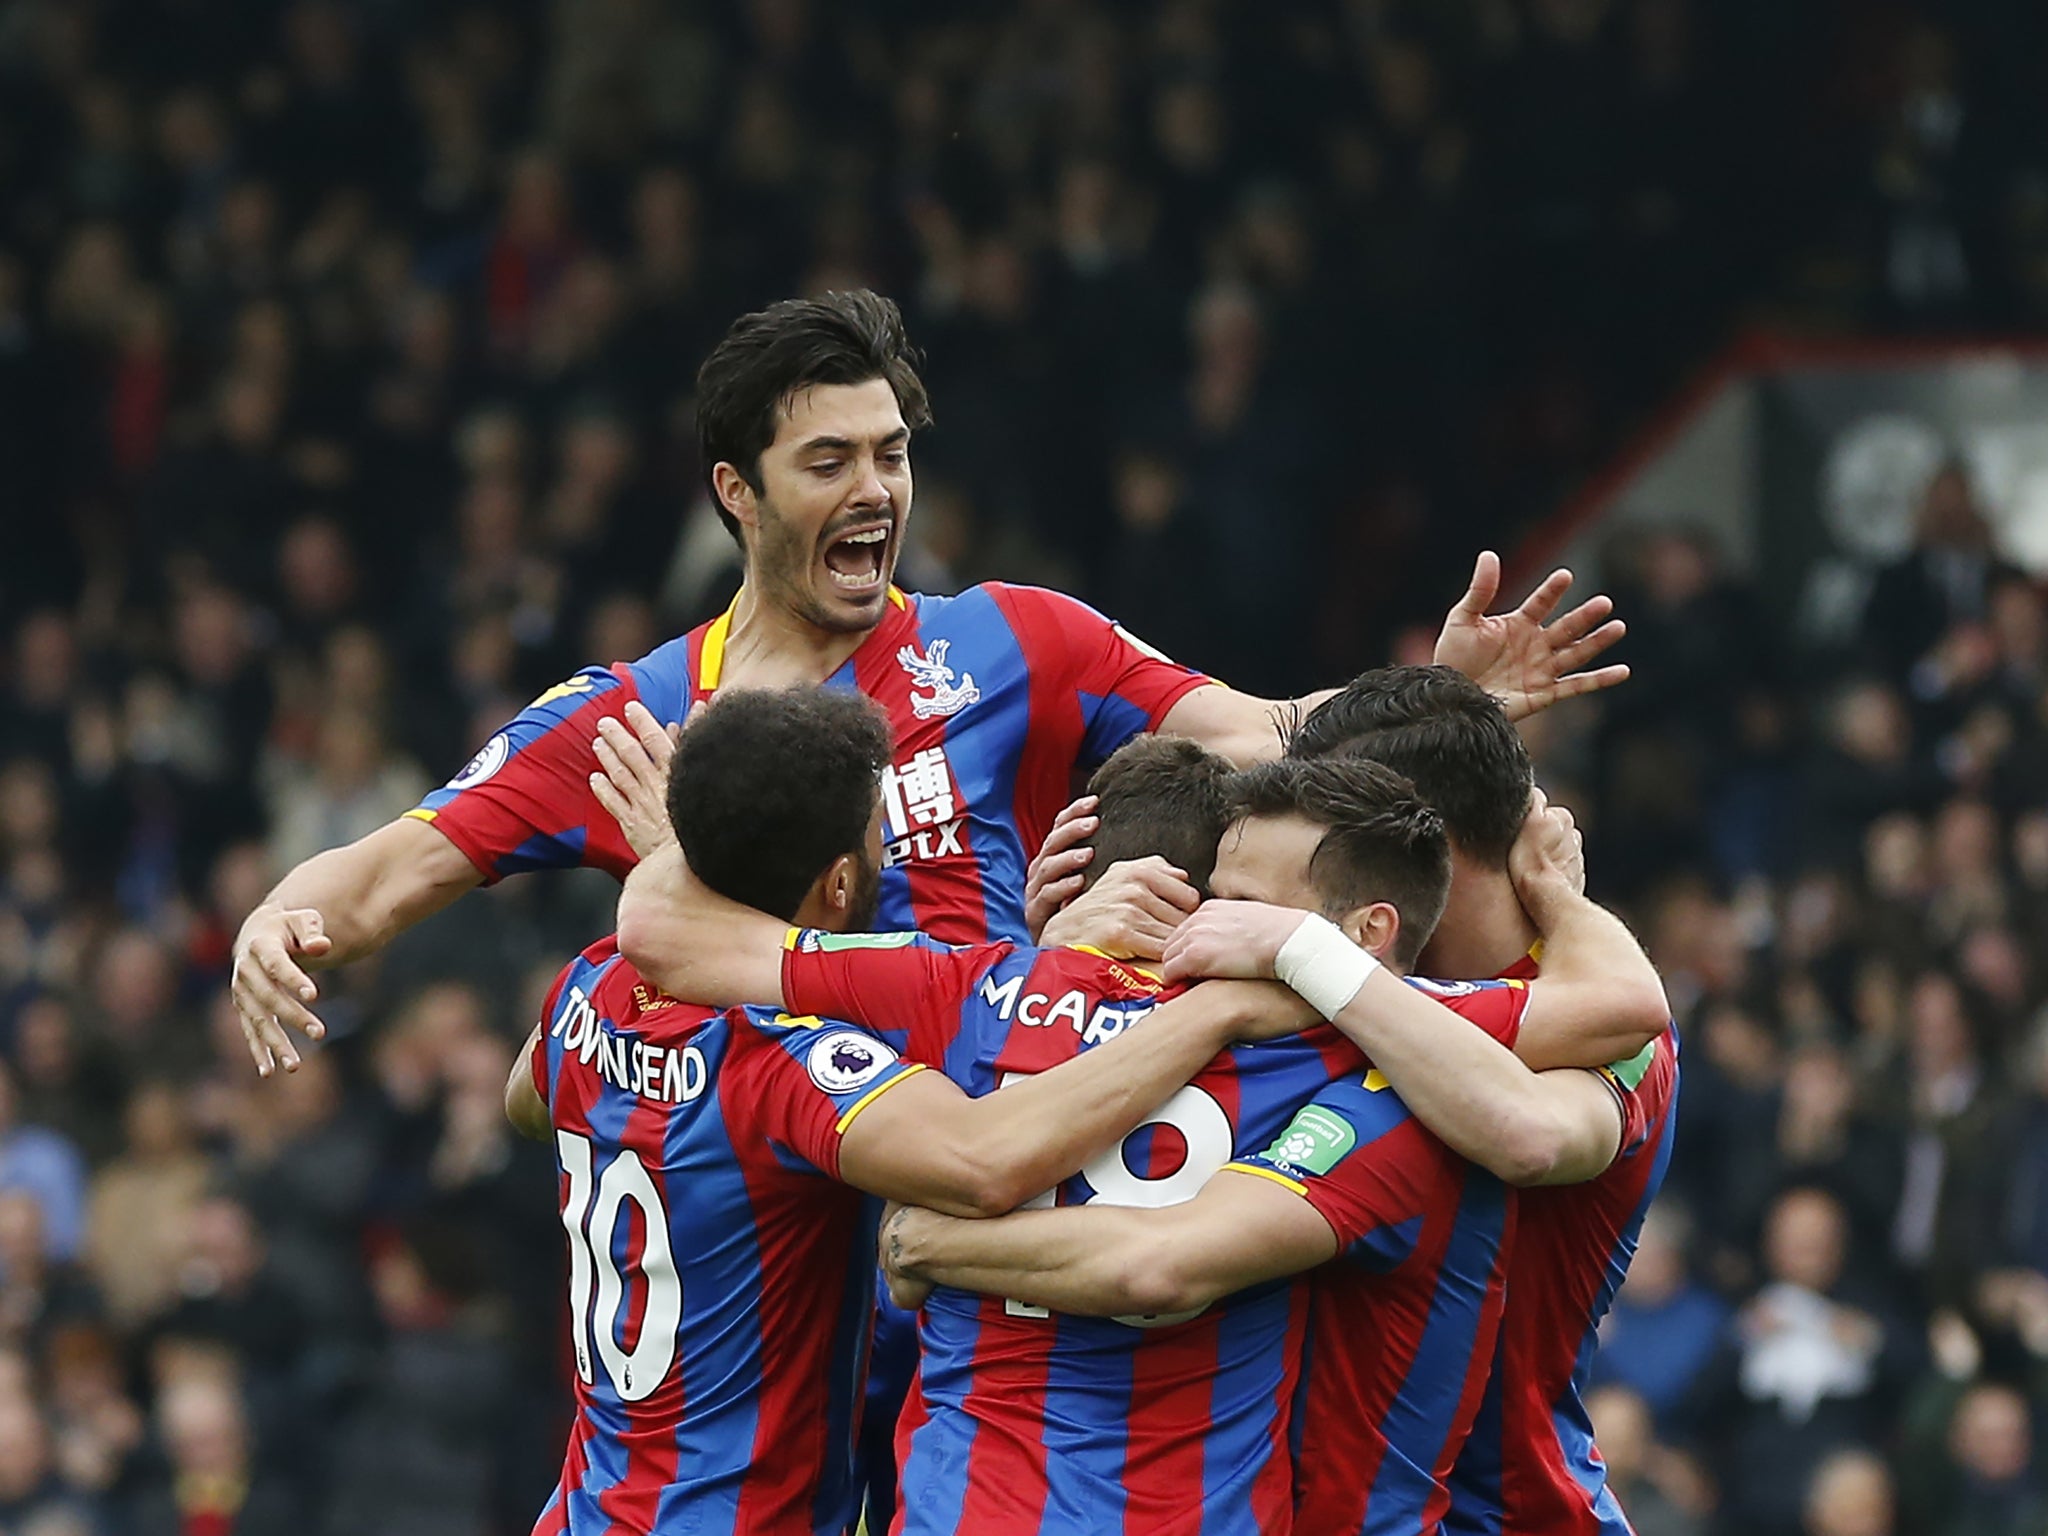 Crystal Palace thrashed Leicester City 5-0 to move up to 11th in the Premier League